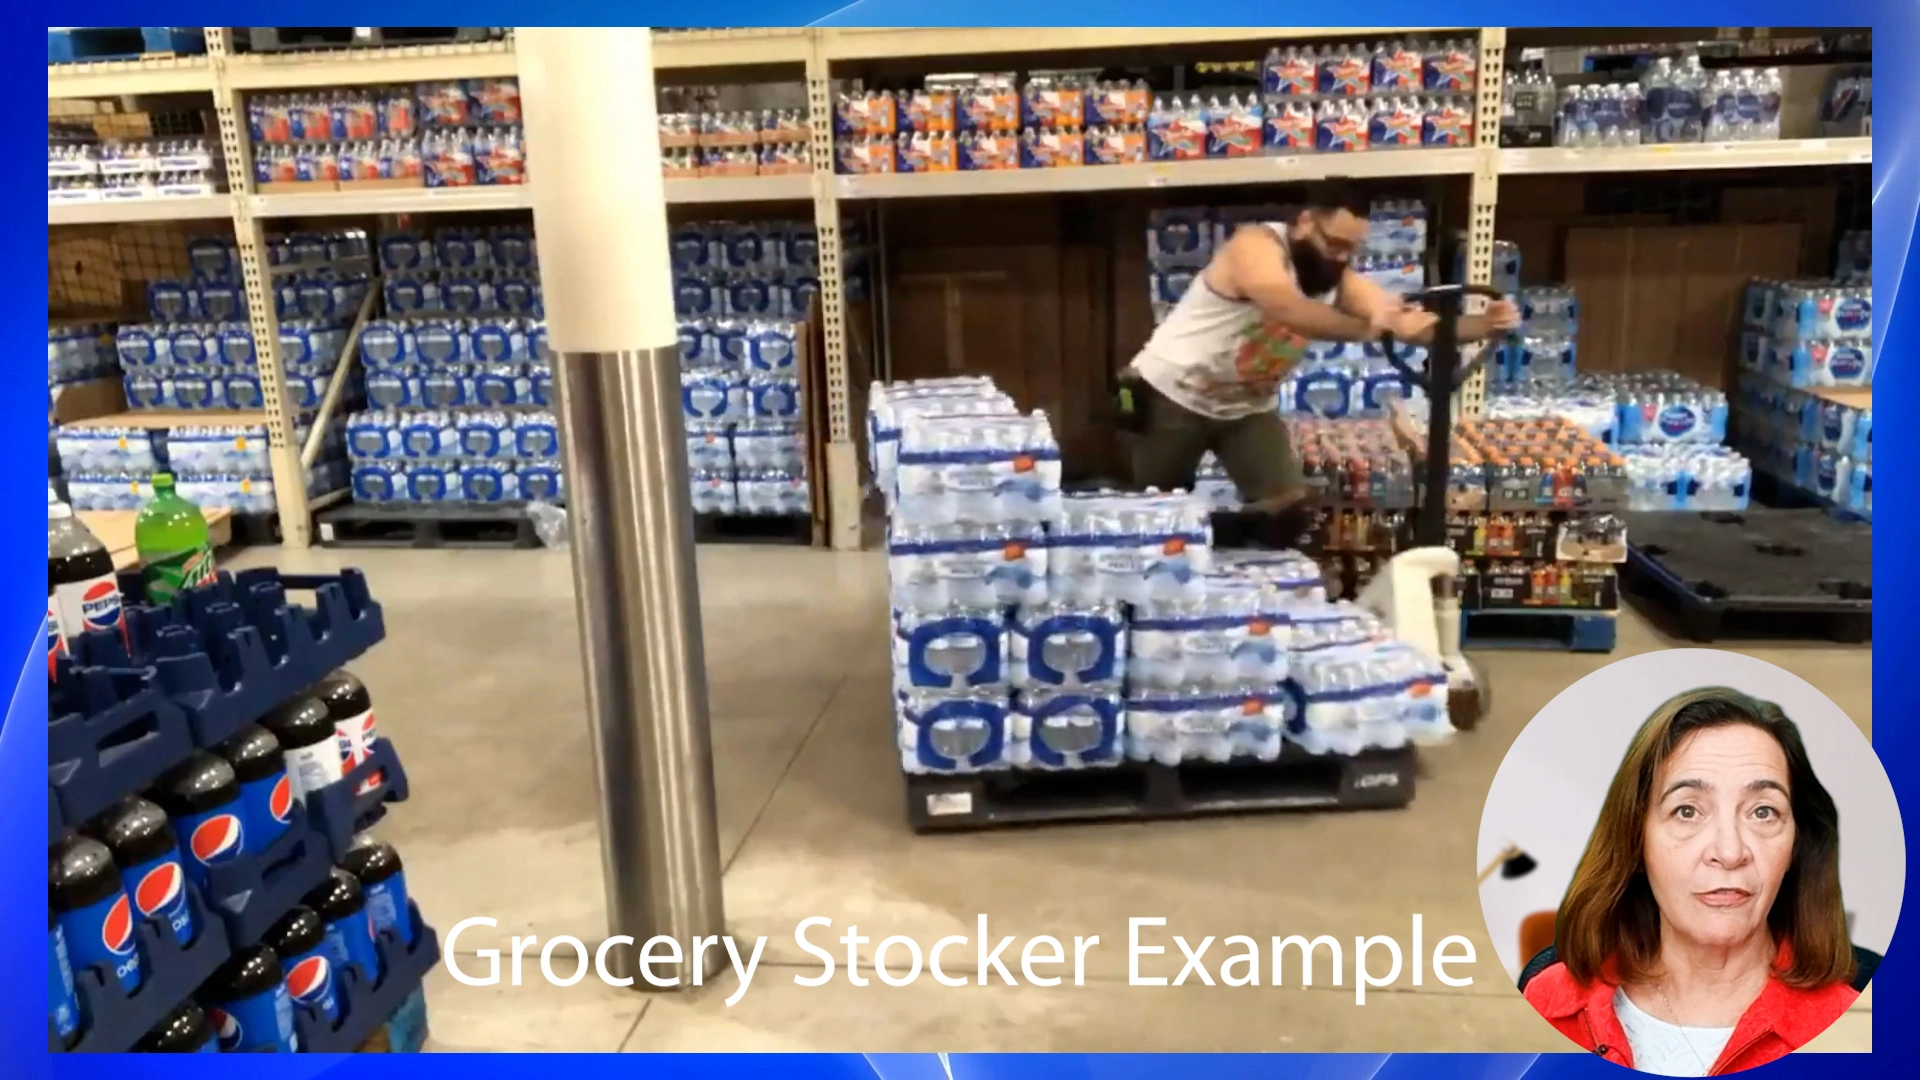 A Grocery Stocker pushes a pallet with water bottles on it.